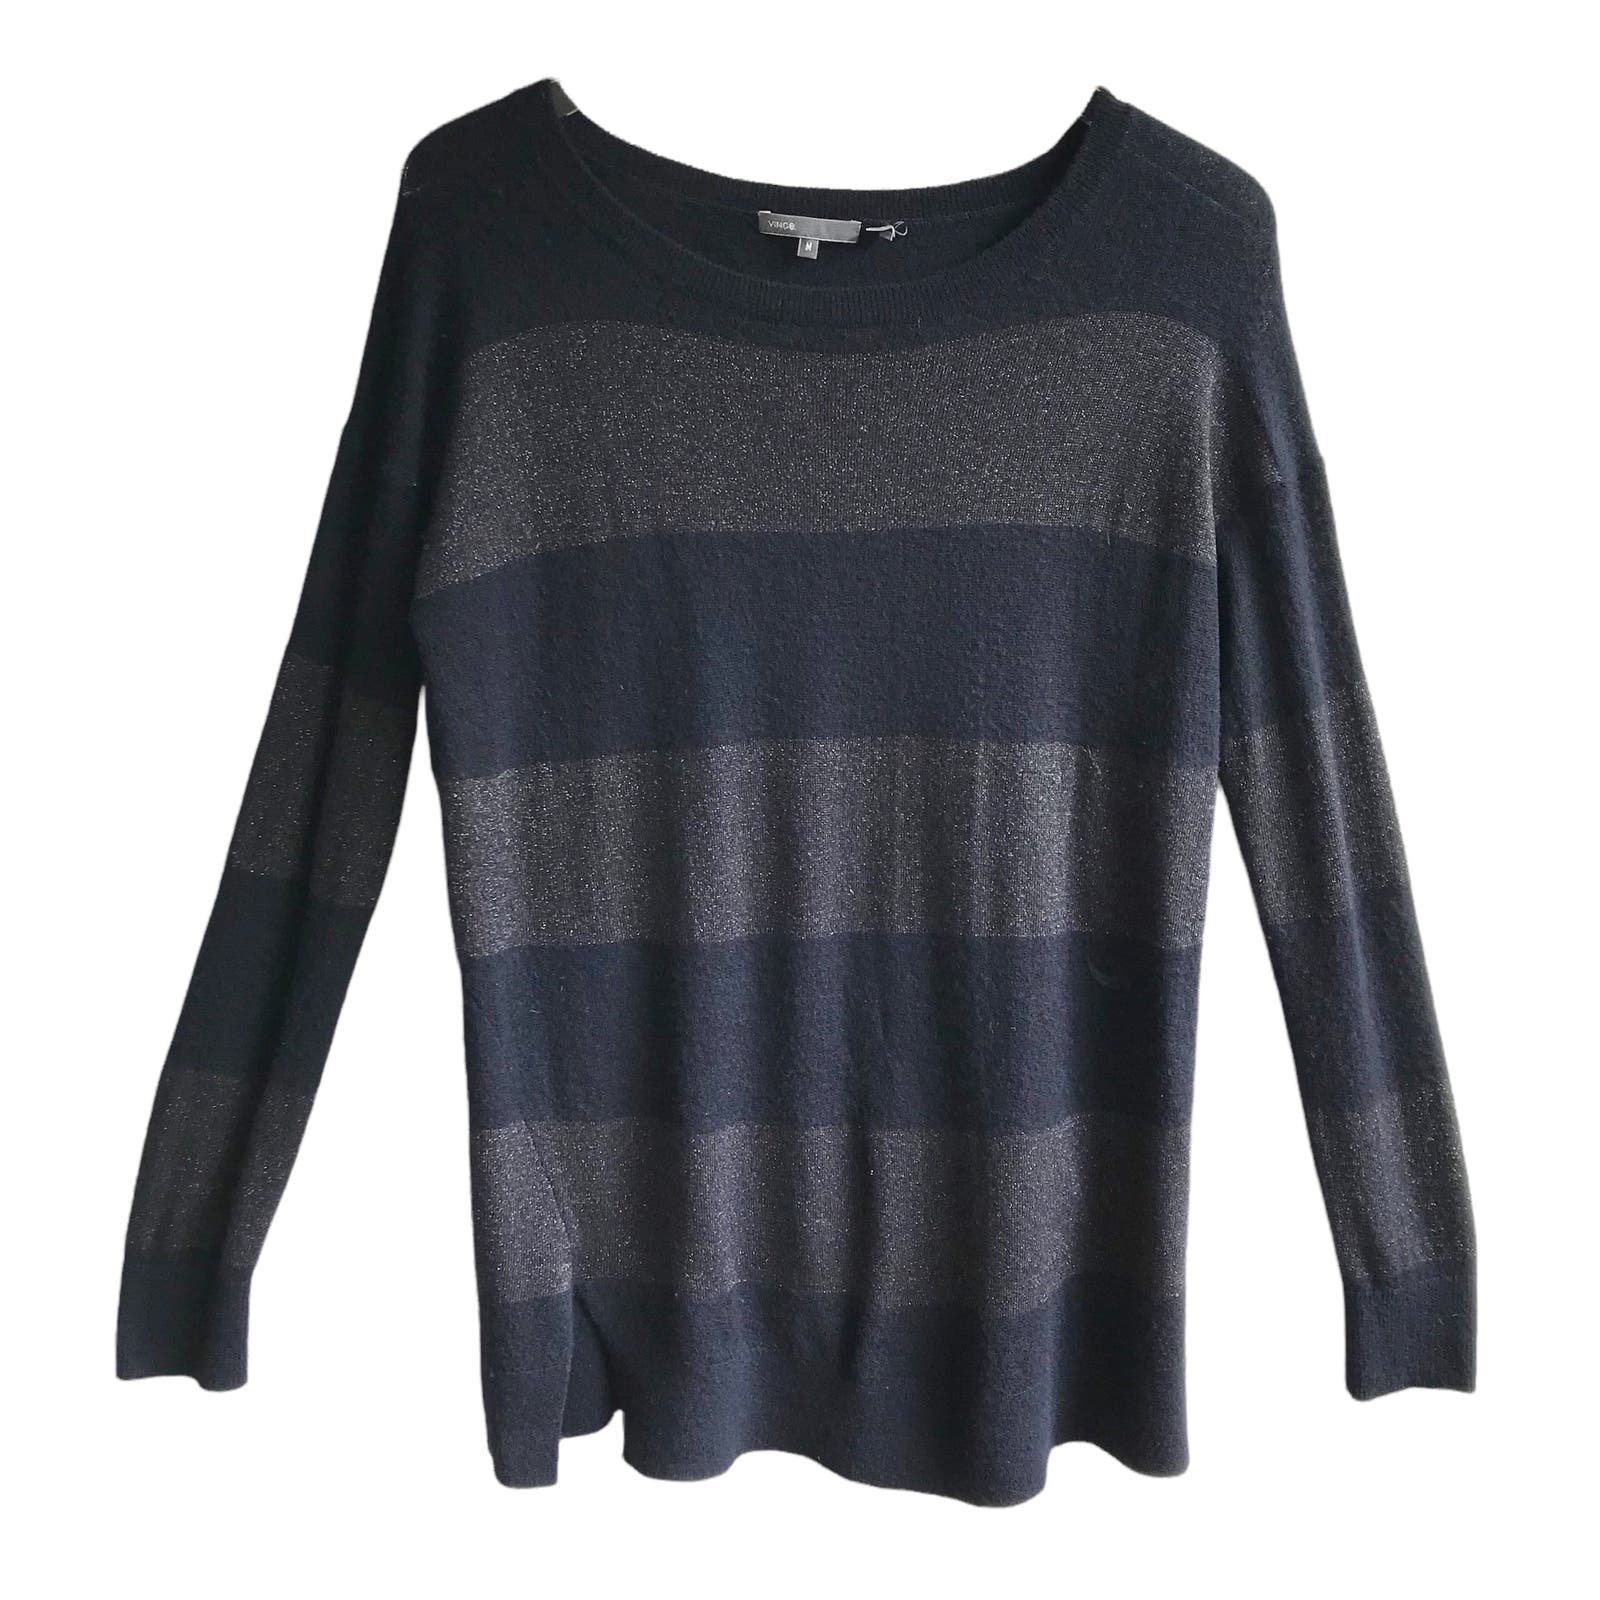 Personality Vince Cashmere Metallic Rugby Stripe Knit S